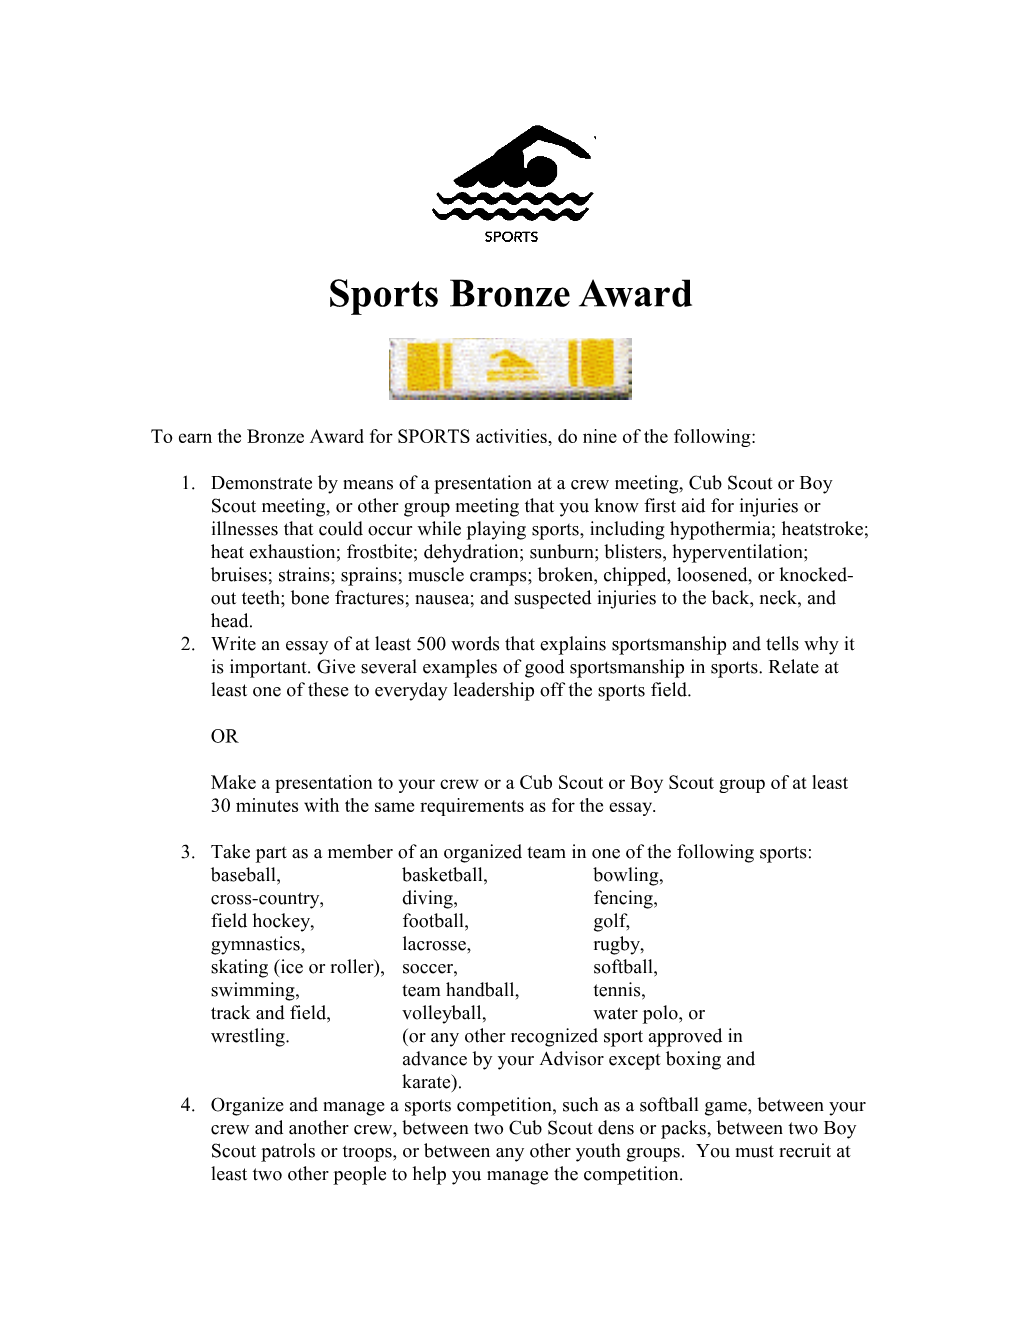 To Earn the Bronze Award for SPORTS Activities, Do Nine of the Following